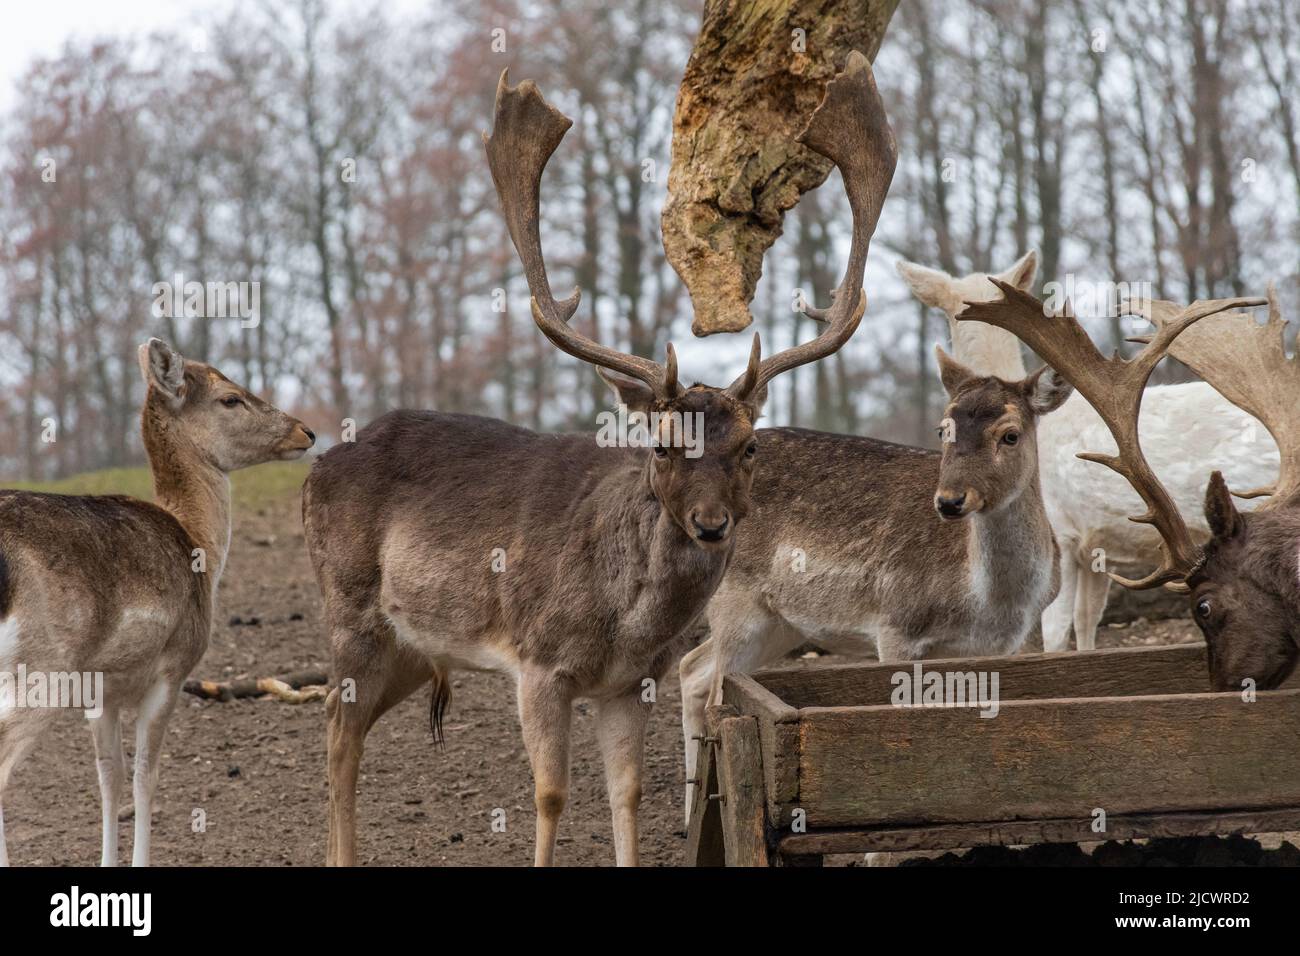 Fallow deer in an outdoor enclosure at a feeding trough Stock Photo